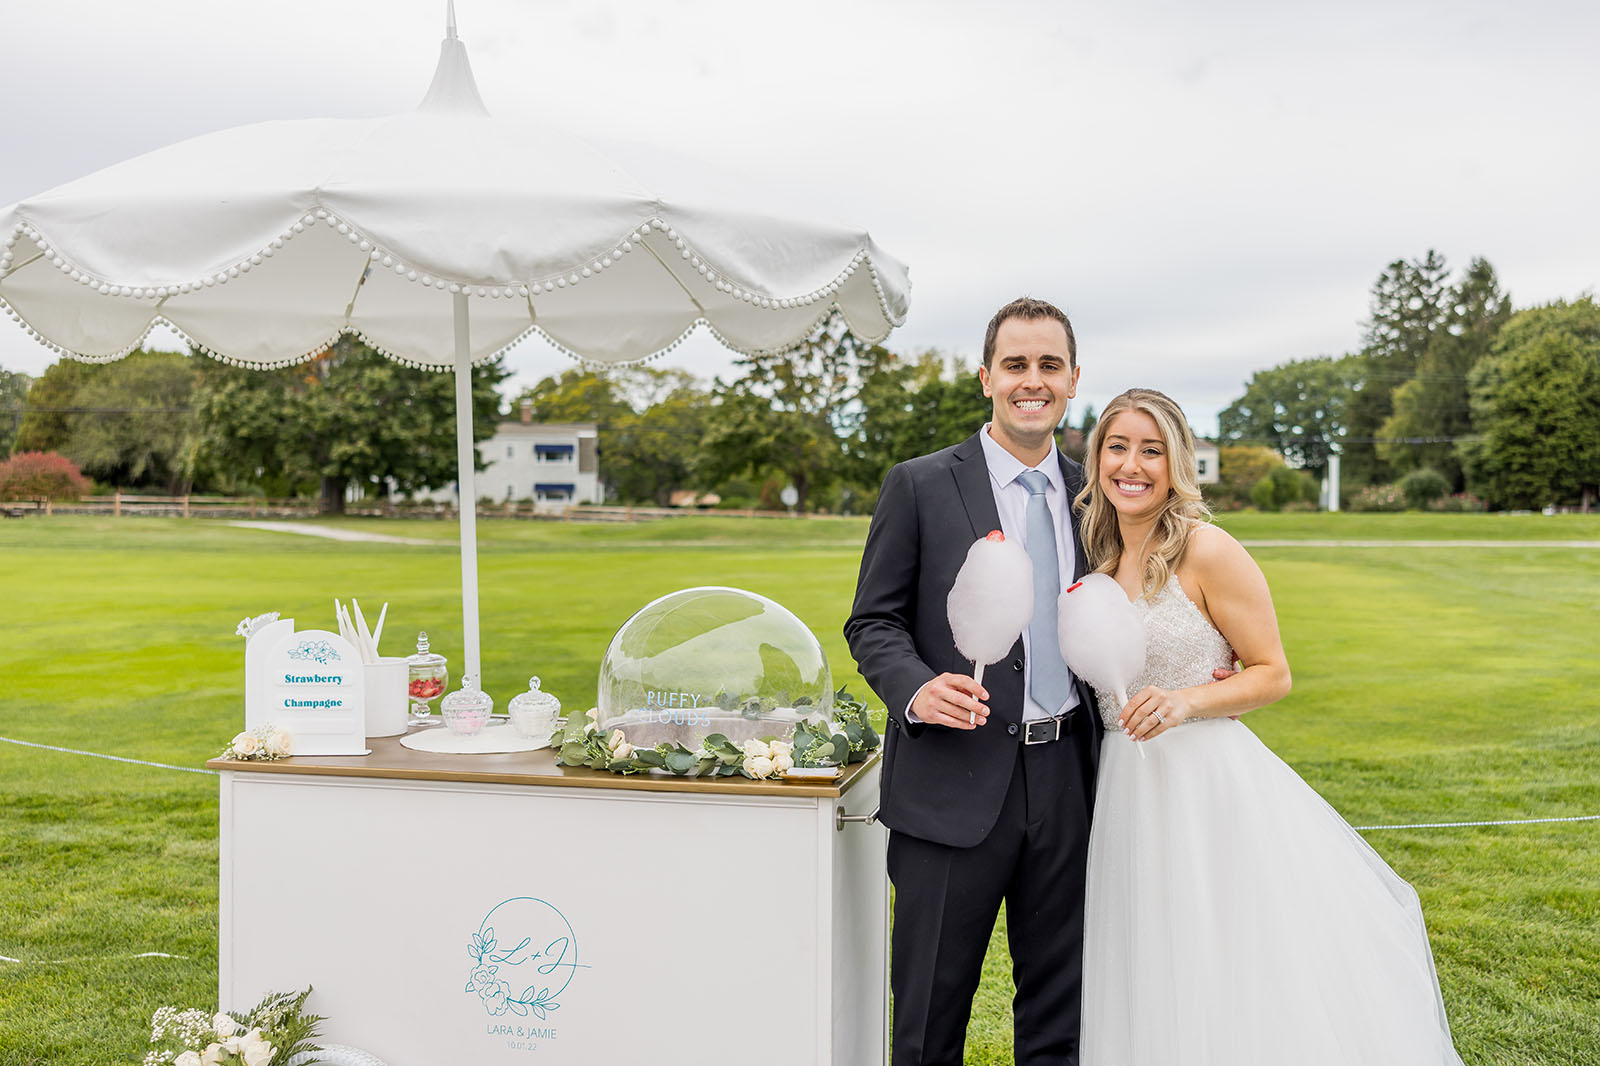 Smiling married couple at wedding posing with cotton candy food cart